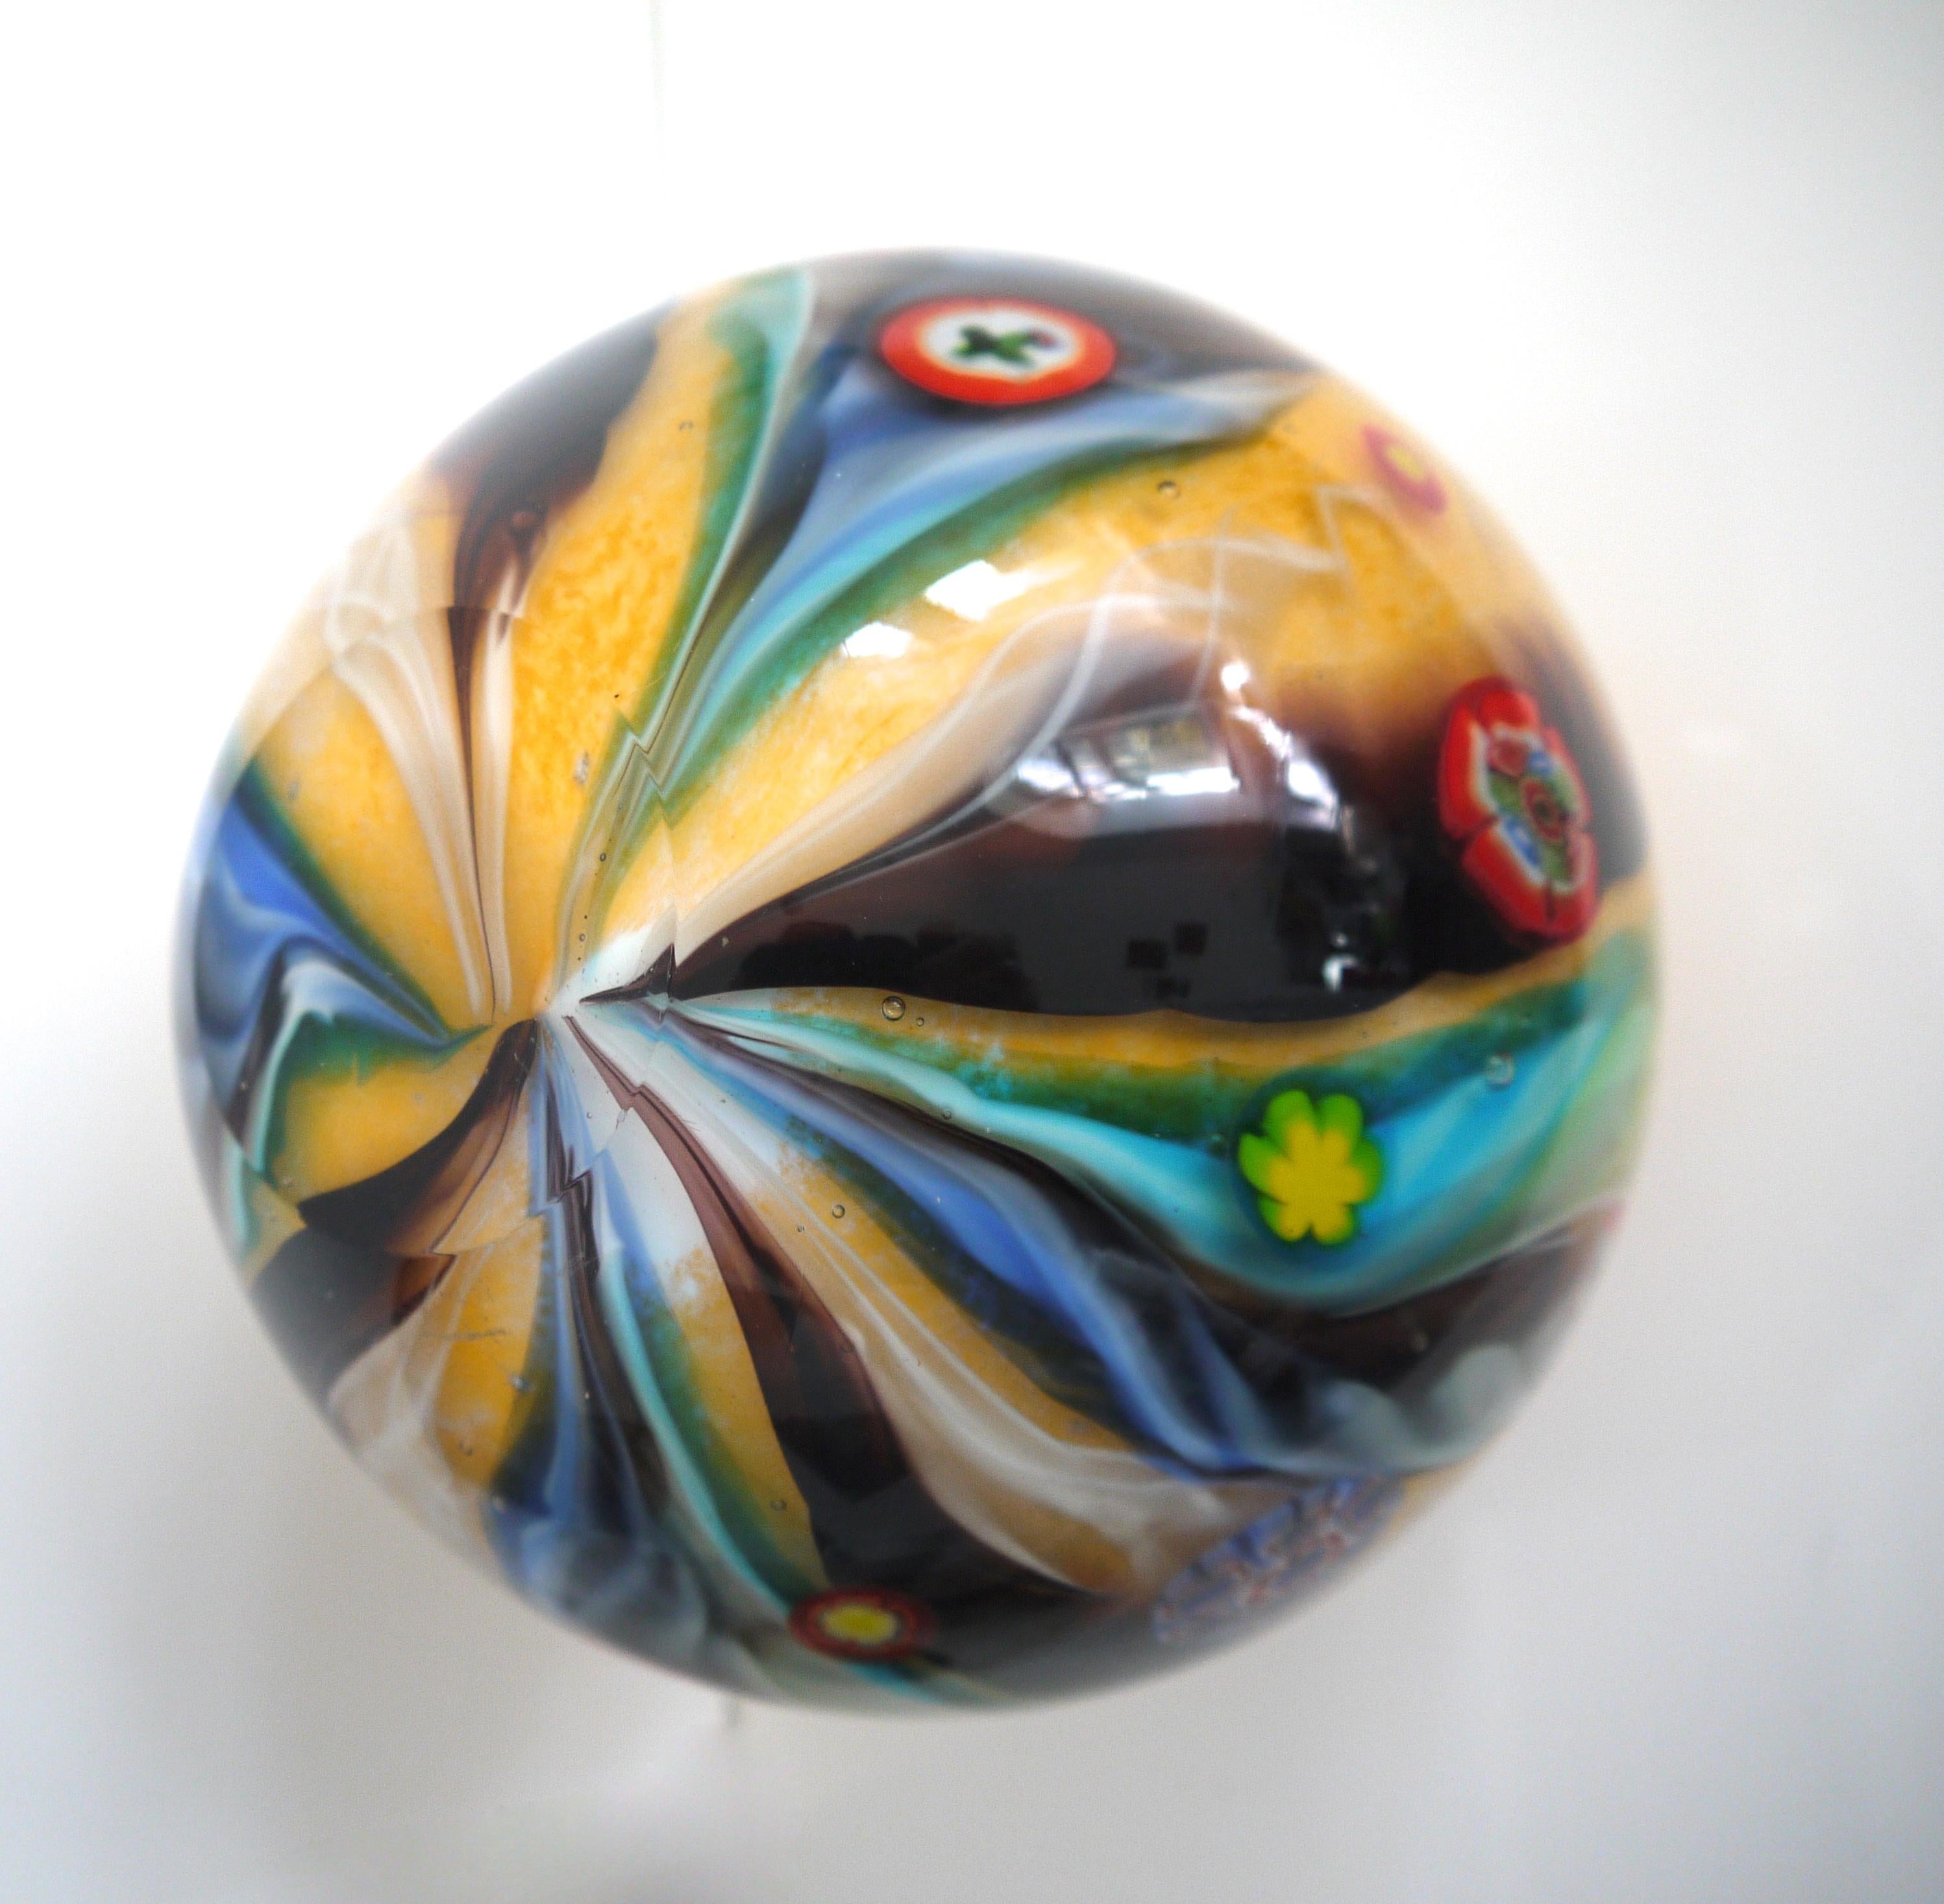 1950 Modernist Italian Murano Mille Fiori 'Orb' Glass Vase by Fratelli Toso In Good Condition For Sale In Halstead, GB